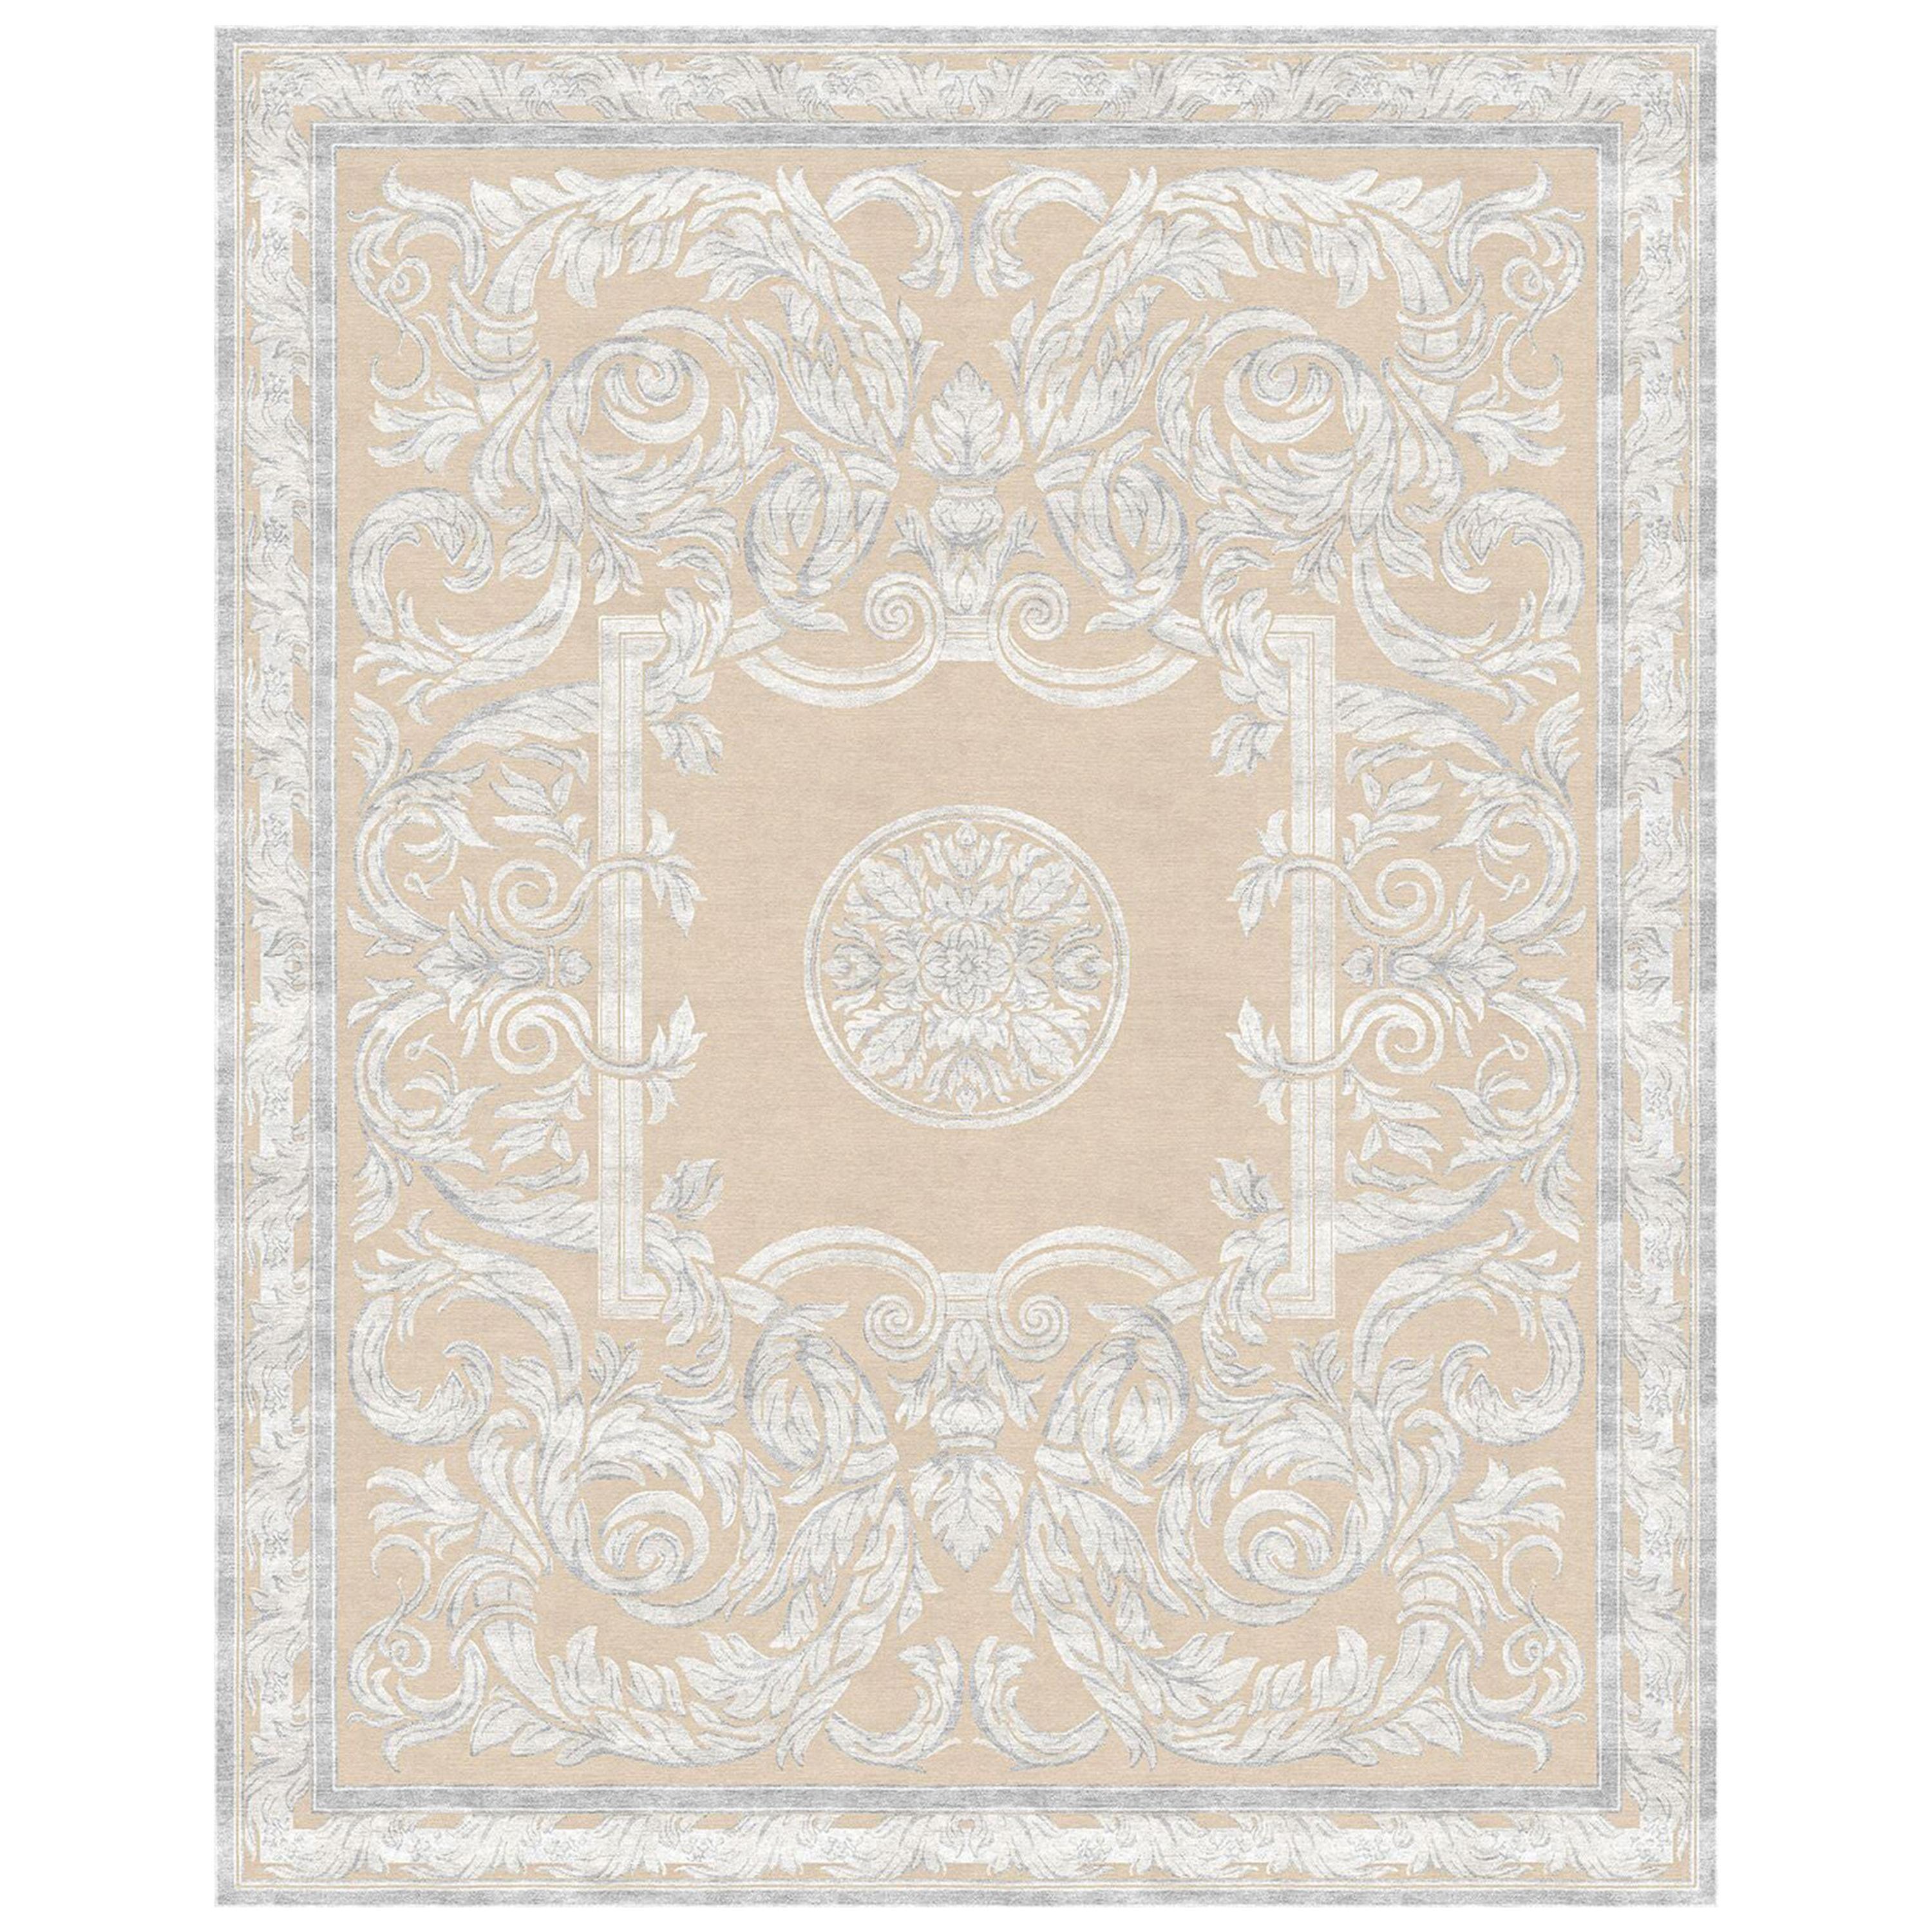 Modern Classic White Beige Rug for living room - Aubusson Heraldy Scroll White For Sale